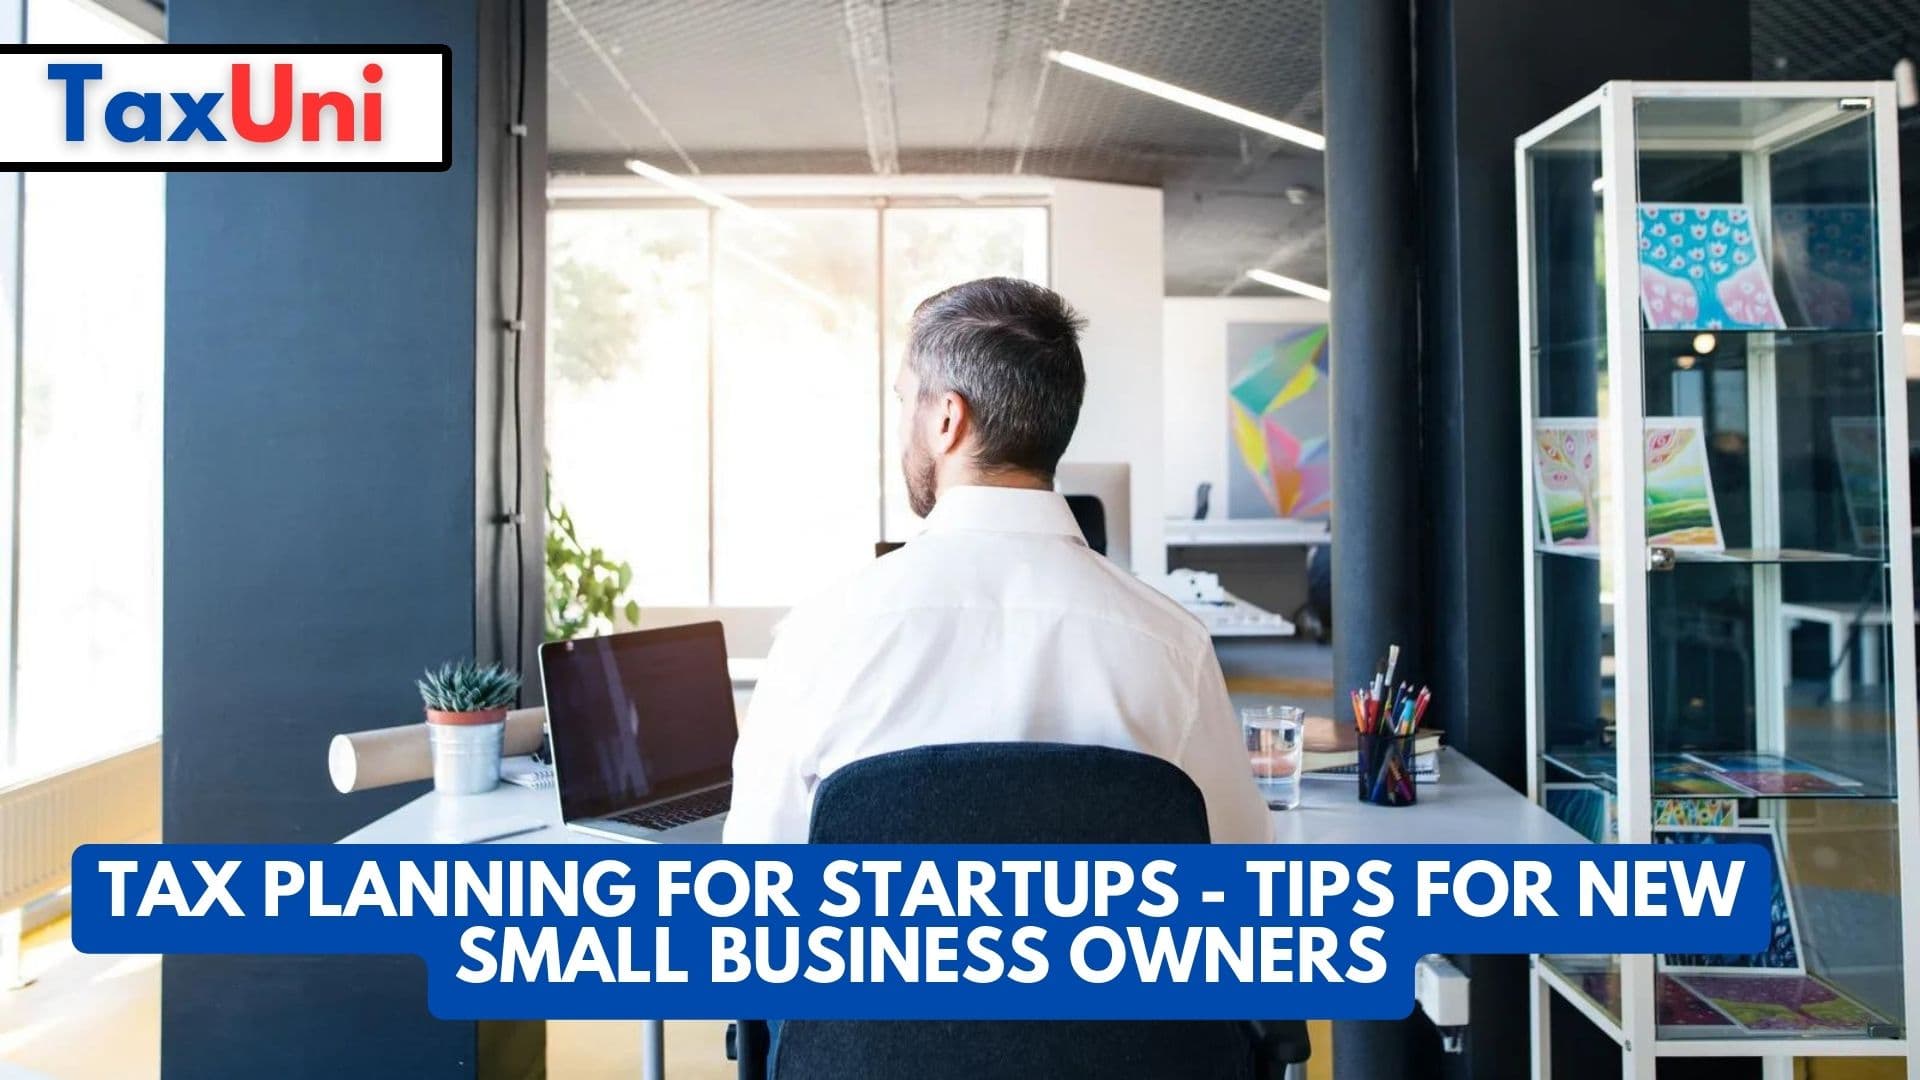 Tax Planning For Startups - Tips For New Small Business Owners